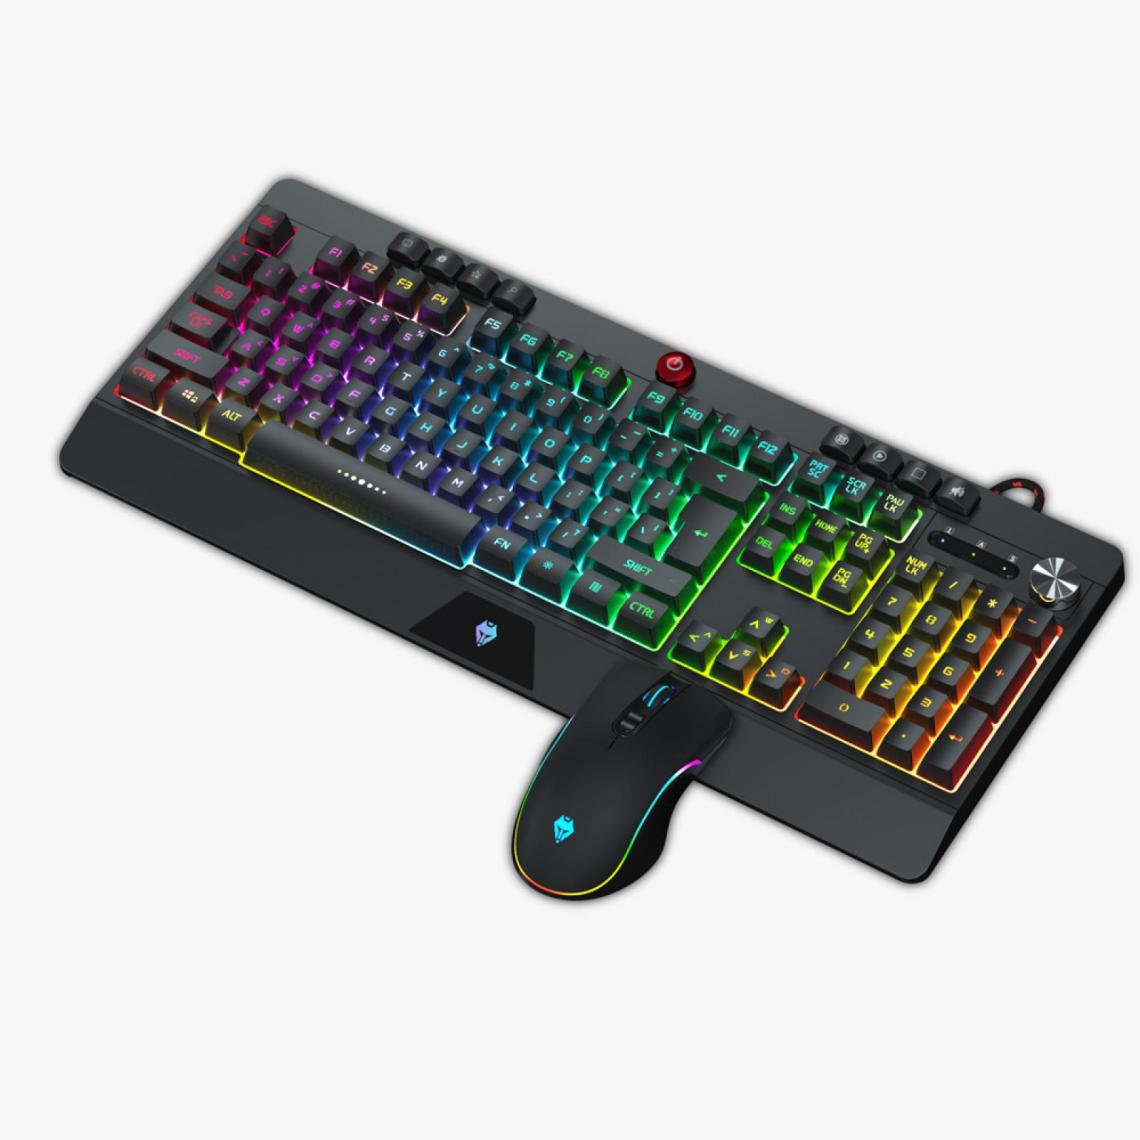 Gengyouyuan - Wolf Way V9000 Mécanique Feel Good RGB Gaming Clavier Clavier Souris Set - Clavier